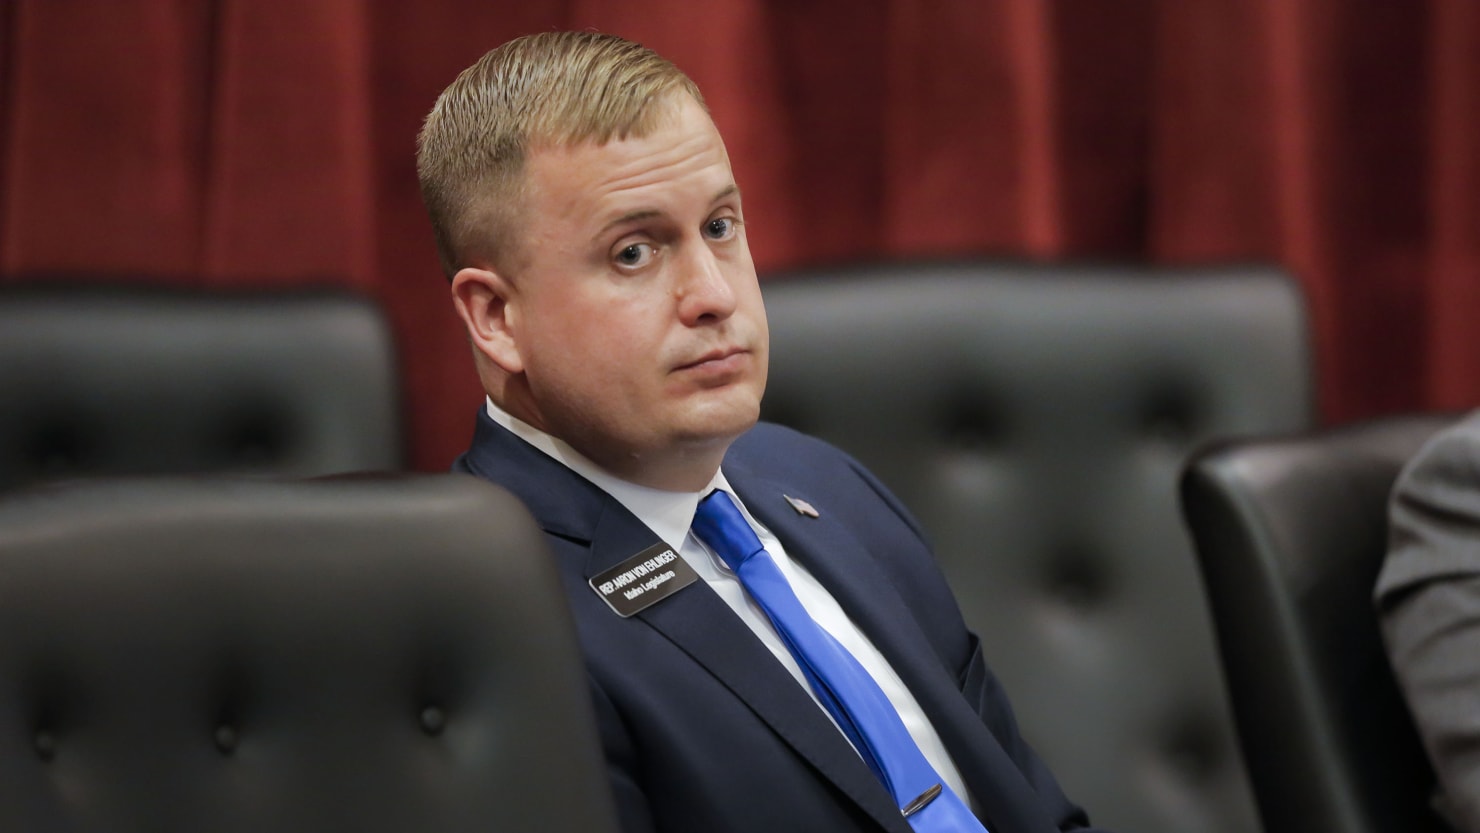 Ex-Republican Lawmaker’s Trial for Raping Teen Intern Goes Off the Rails